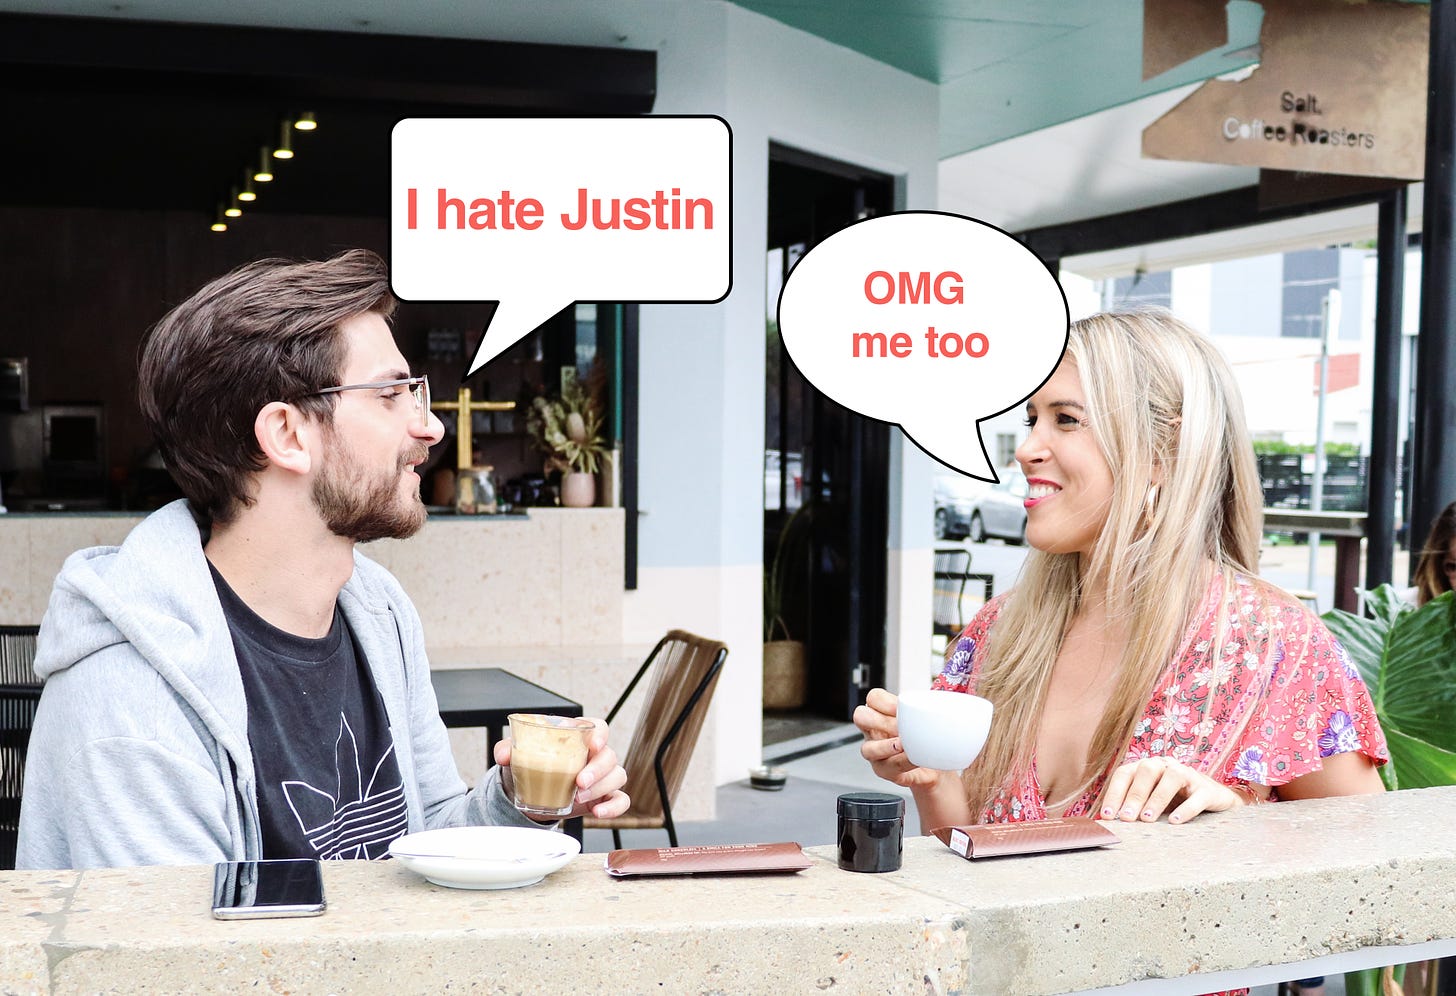 Two friends having brunch, one says: 'I hate Justin' and the other says 'OMG me too'